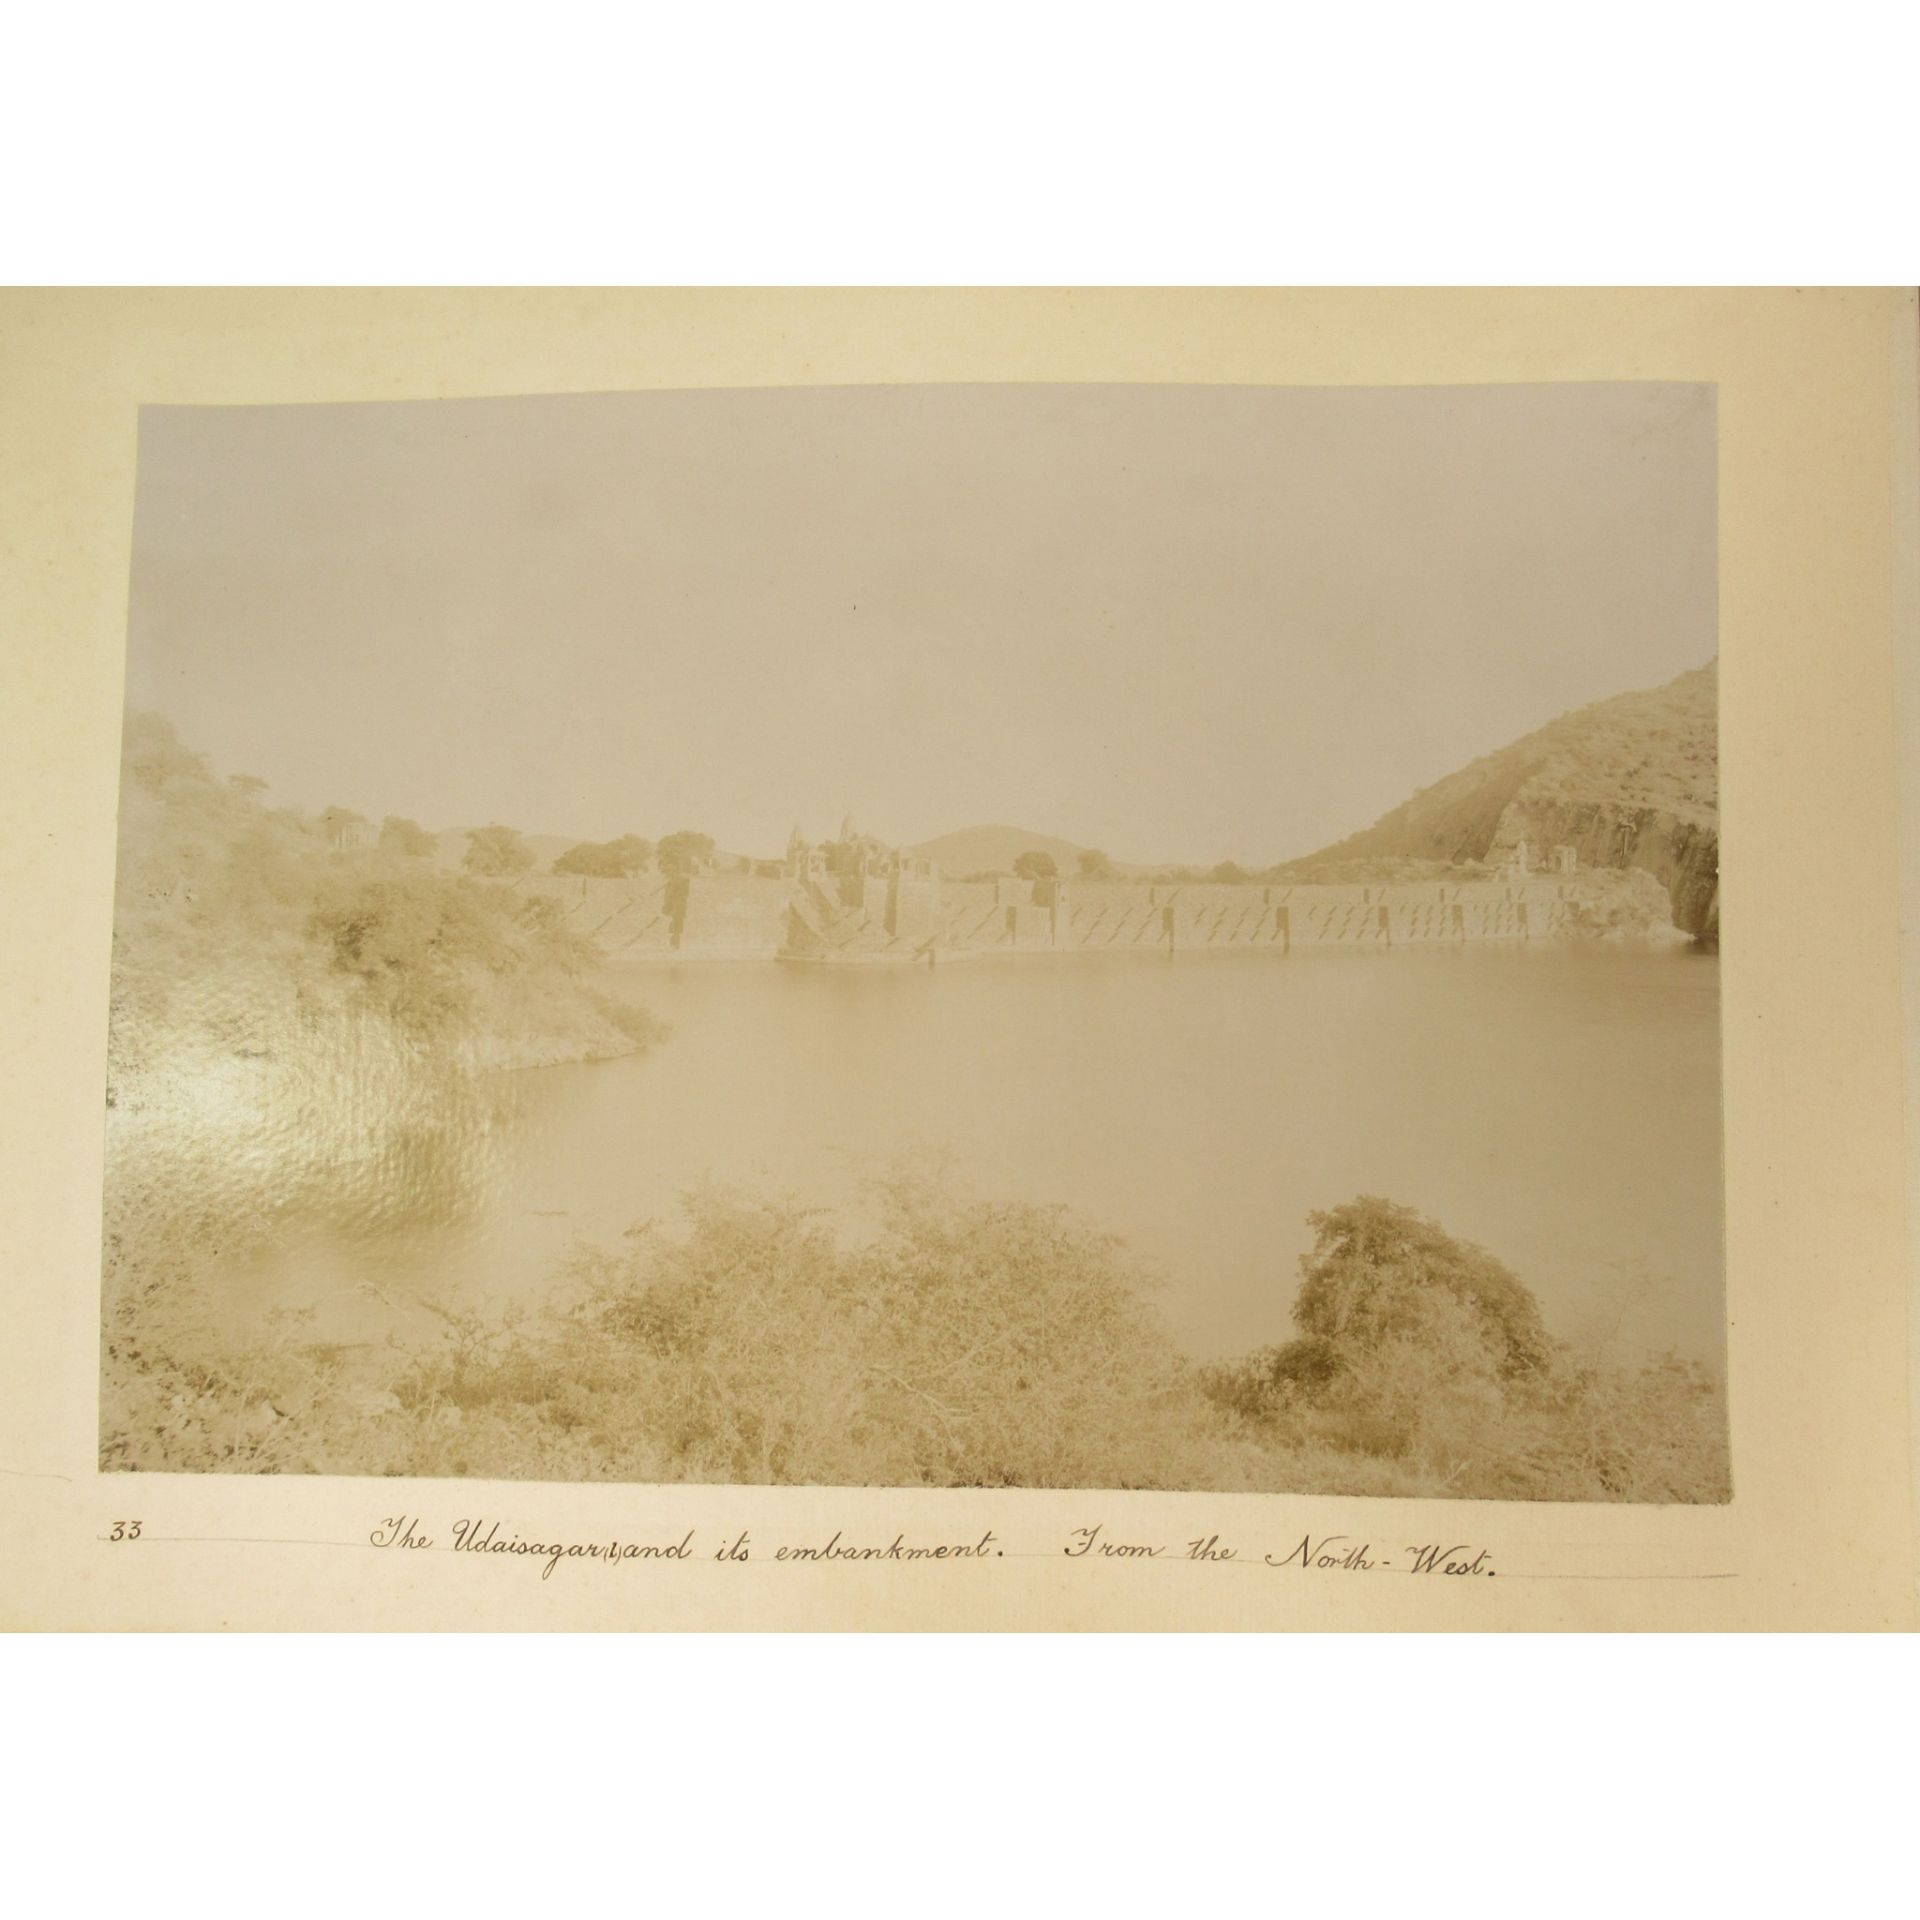 India: a photograph album Photographs of Rajasthan by Mohan Lal of Udaipur, late 19th century - Image 23 of 23